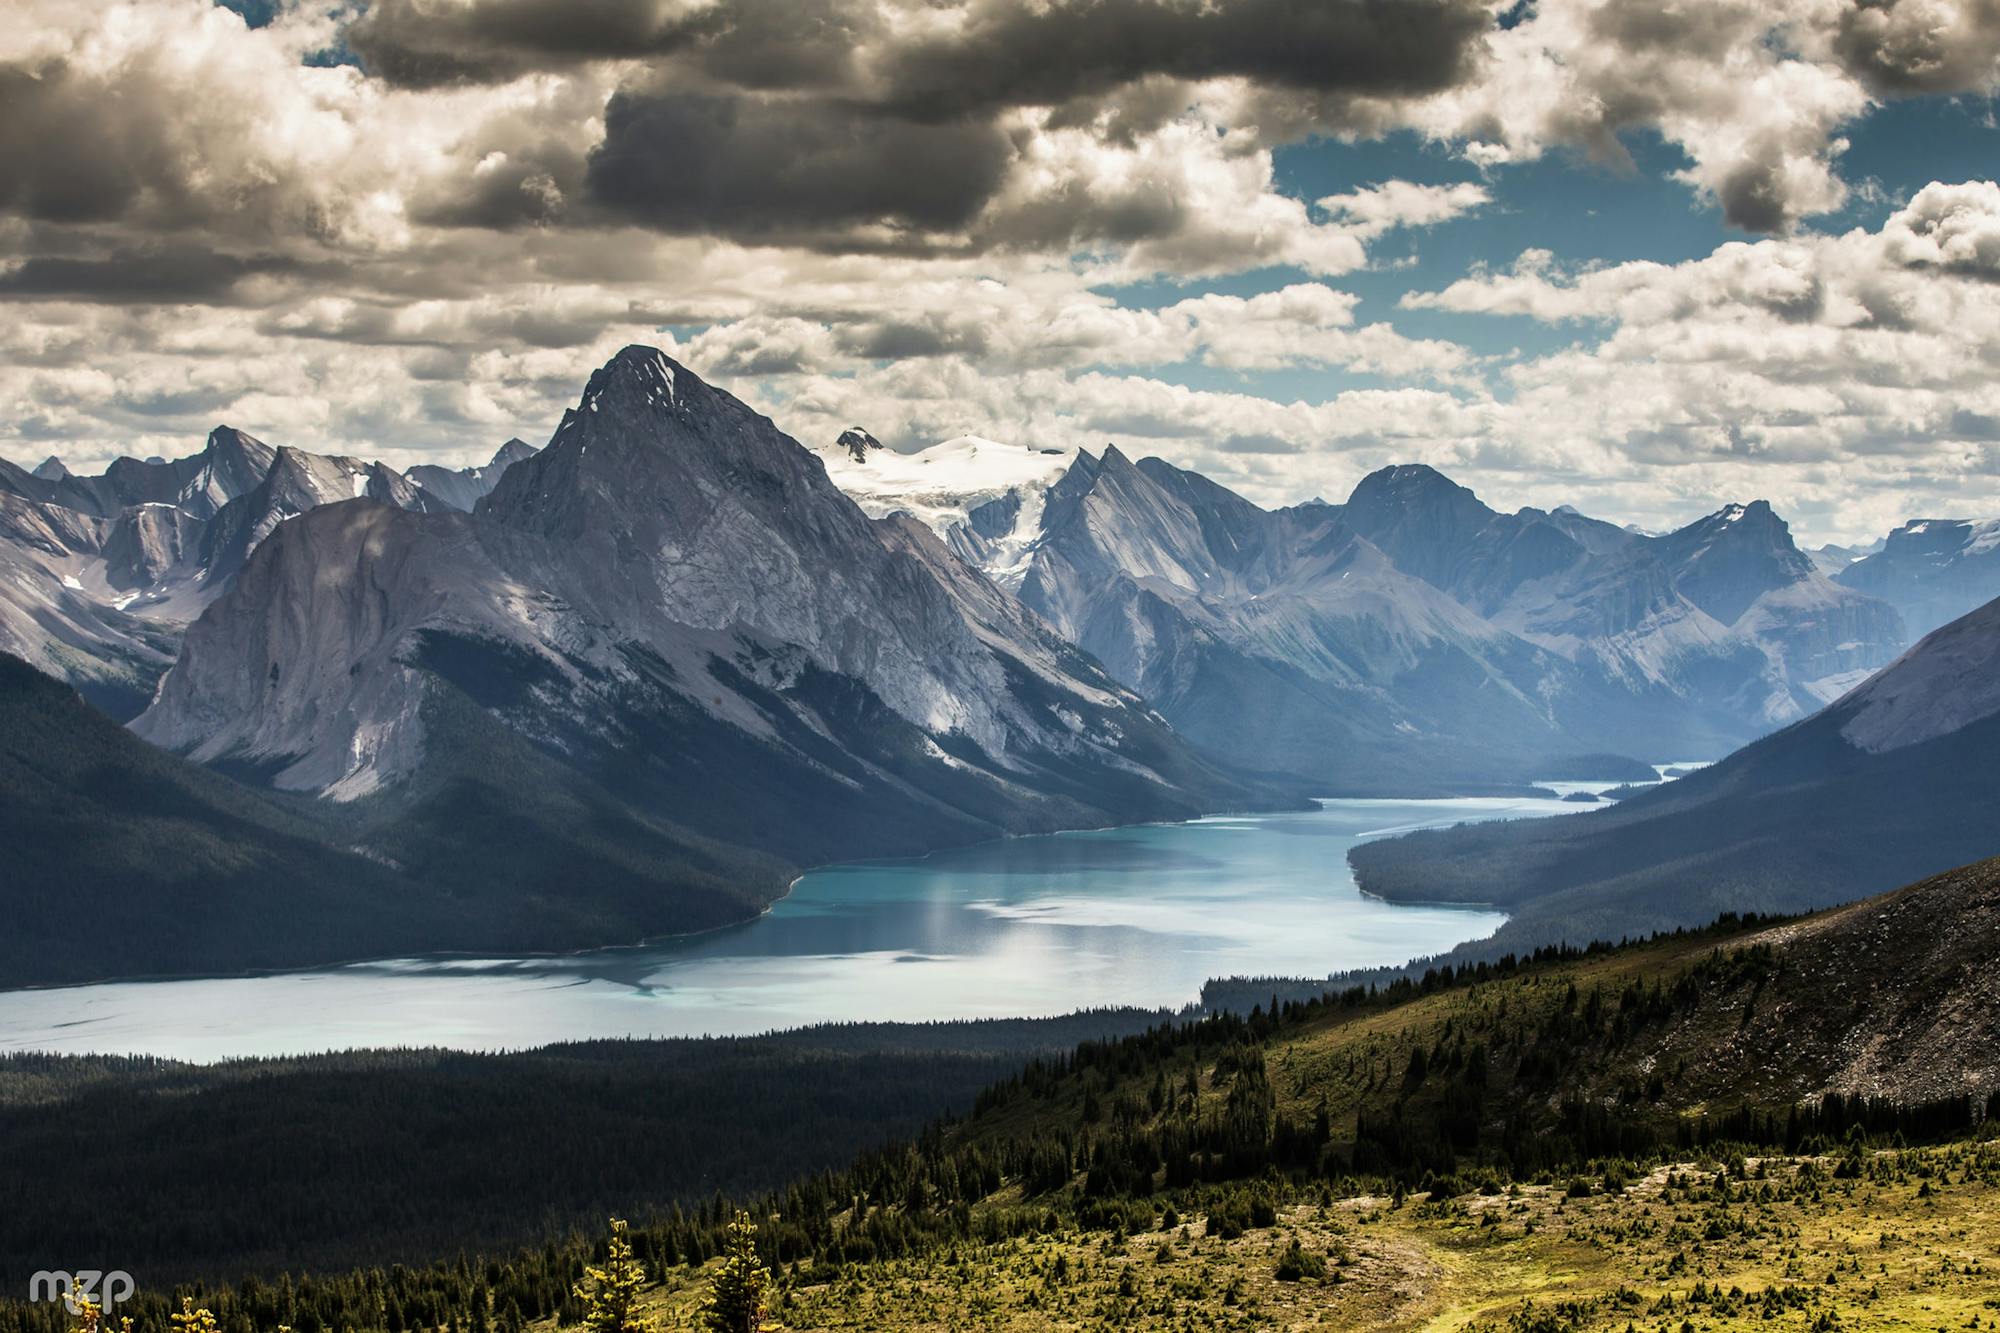 A closer look at Maligne Lake from Bald Hills